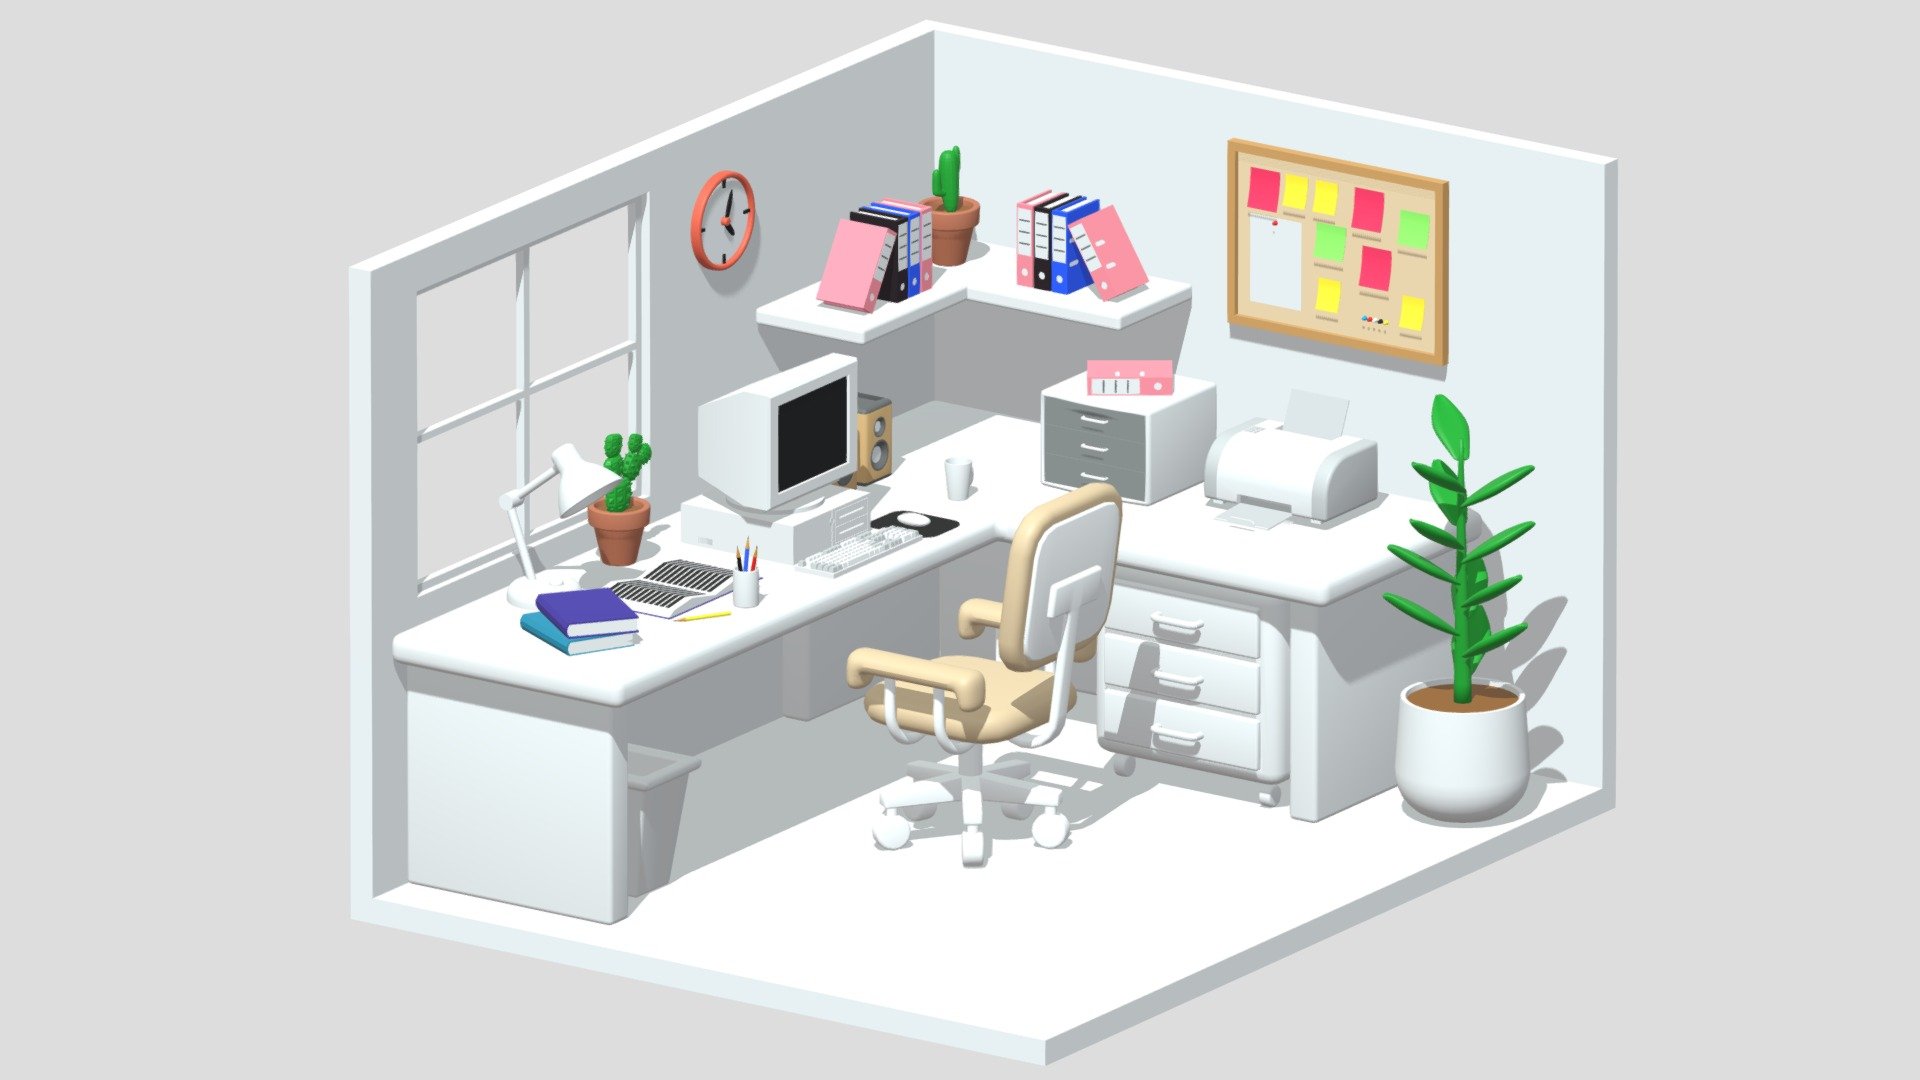 -Cartoon Office Room Interior.

-This product contains 77 objects.

-This product contains 58 materials

-Vert: 33,661 poly: 30,458.

-Objects and materials have the correct names.

-This product was created in Blender 2.935.

-Formats: blend, fbx, obj, c4d, dae, abc, stl, u4d glb, unity.

-We hope you enjoy this model.

-Thank you 3d model